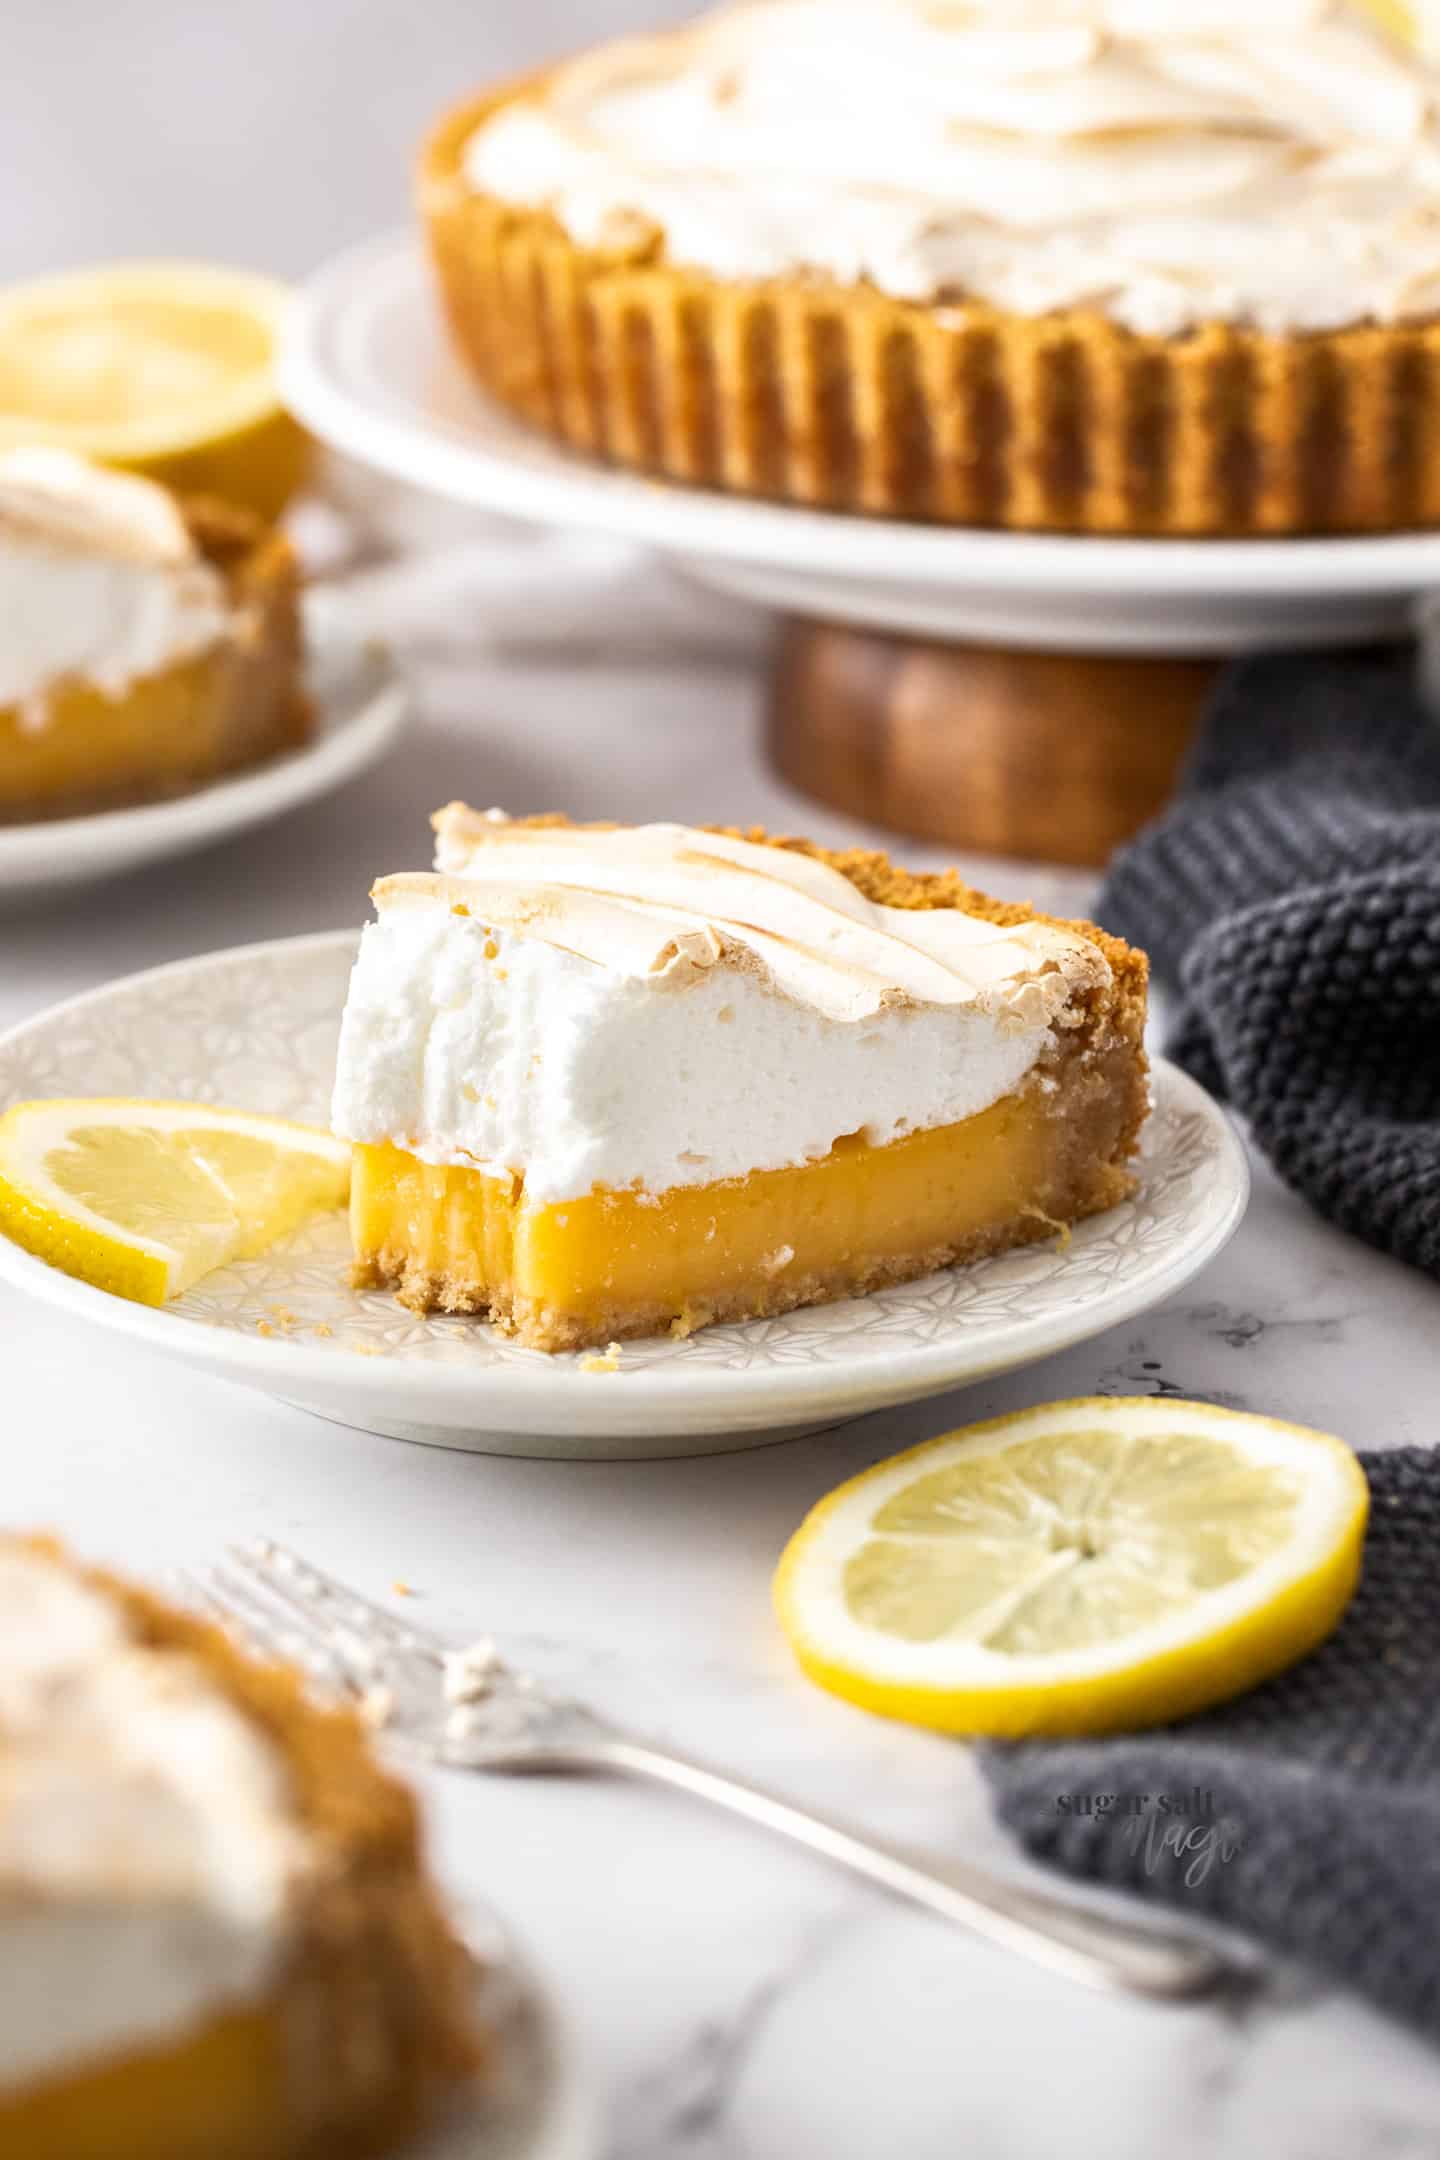 A slice of lemon meringue pie on a white plate with a forkful taken out of it.